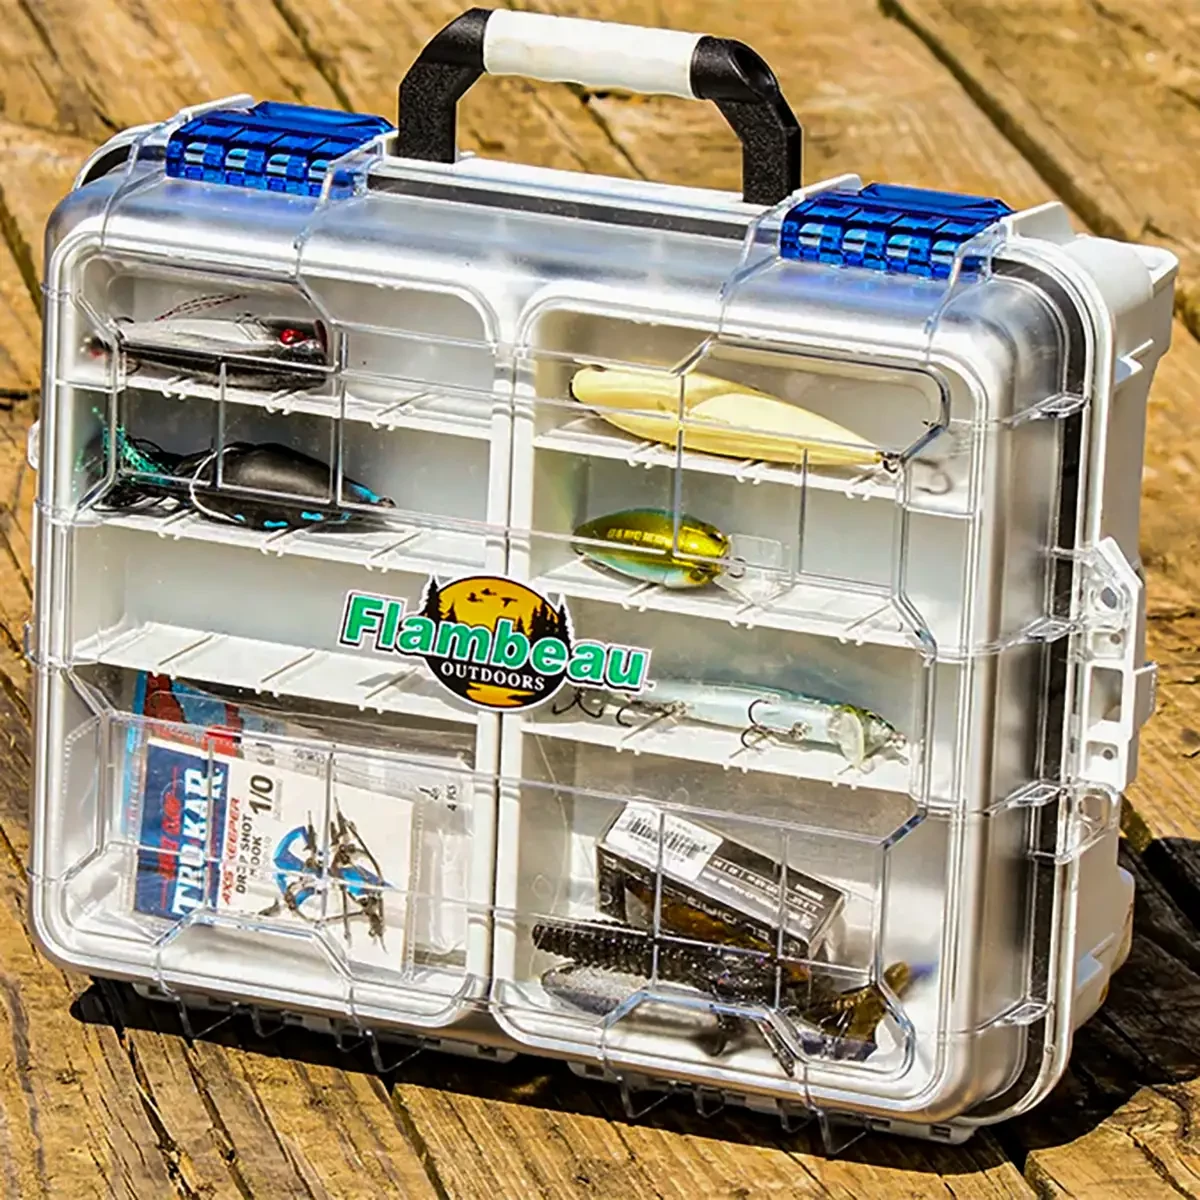 Plano 3-Tray Tackle Box with Berkley Trout Bait Kit - 1 Each